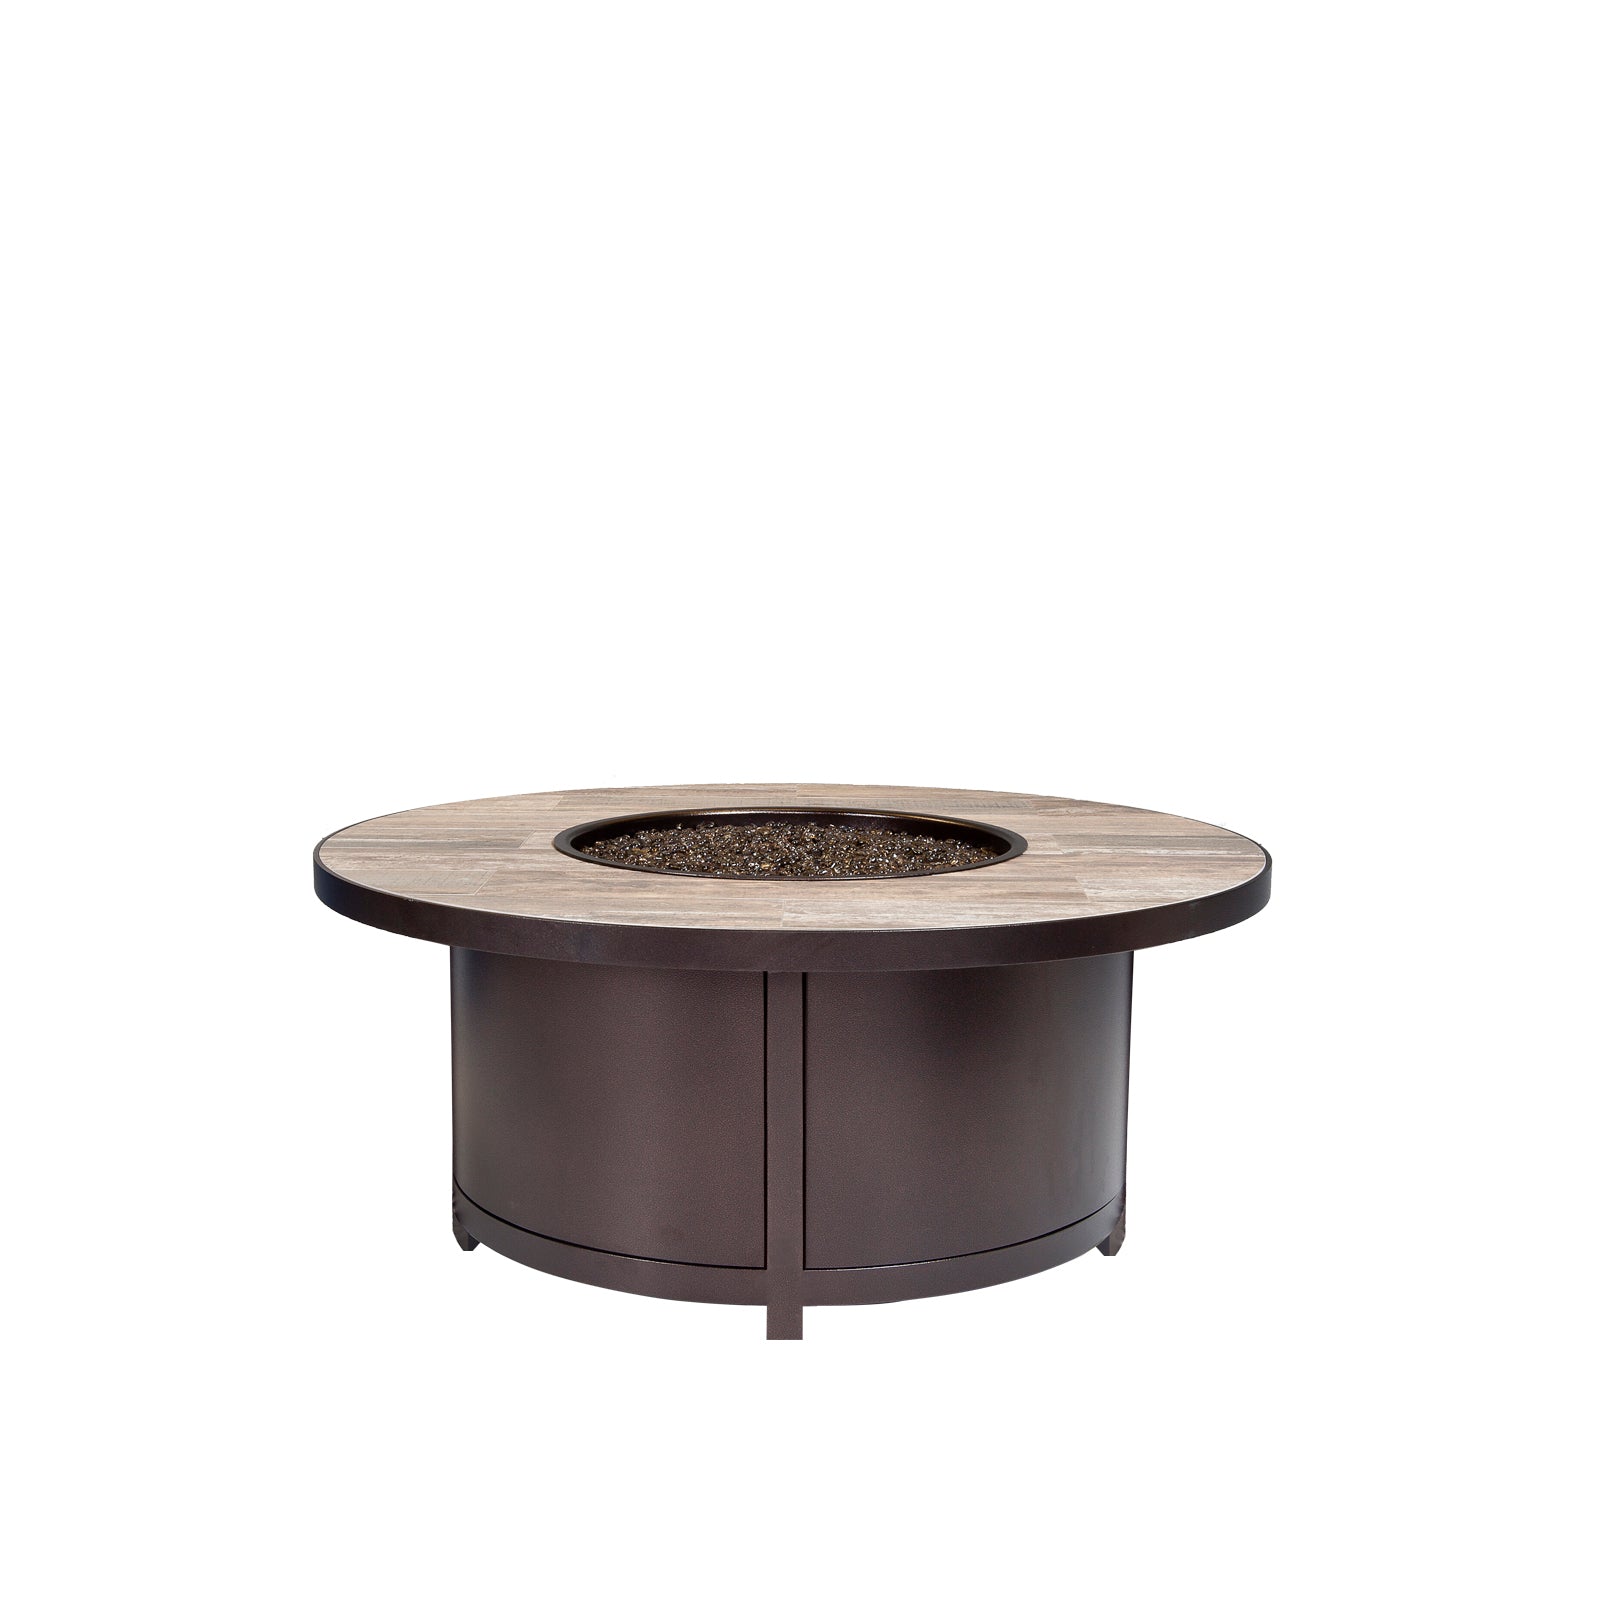 42" Dia Round Elba Aluminum Fire Pit by Ow Lee